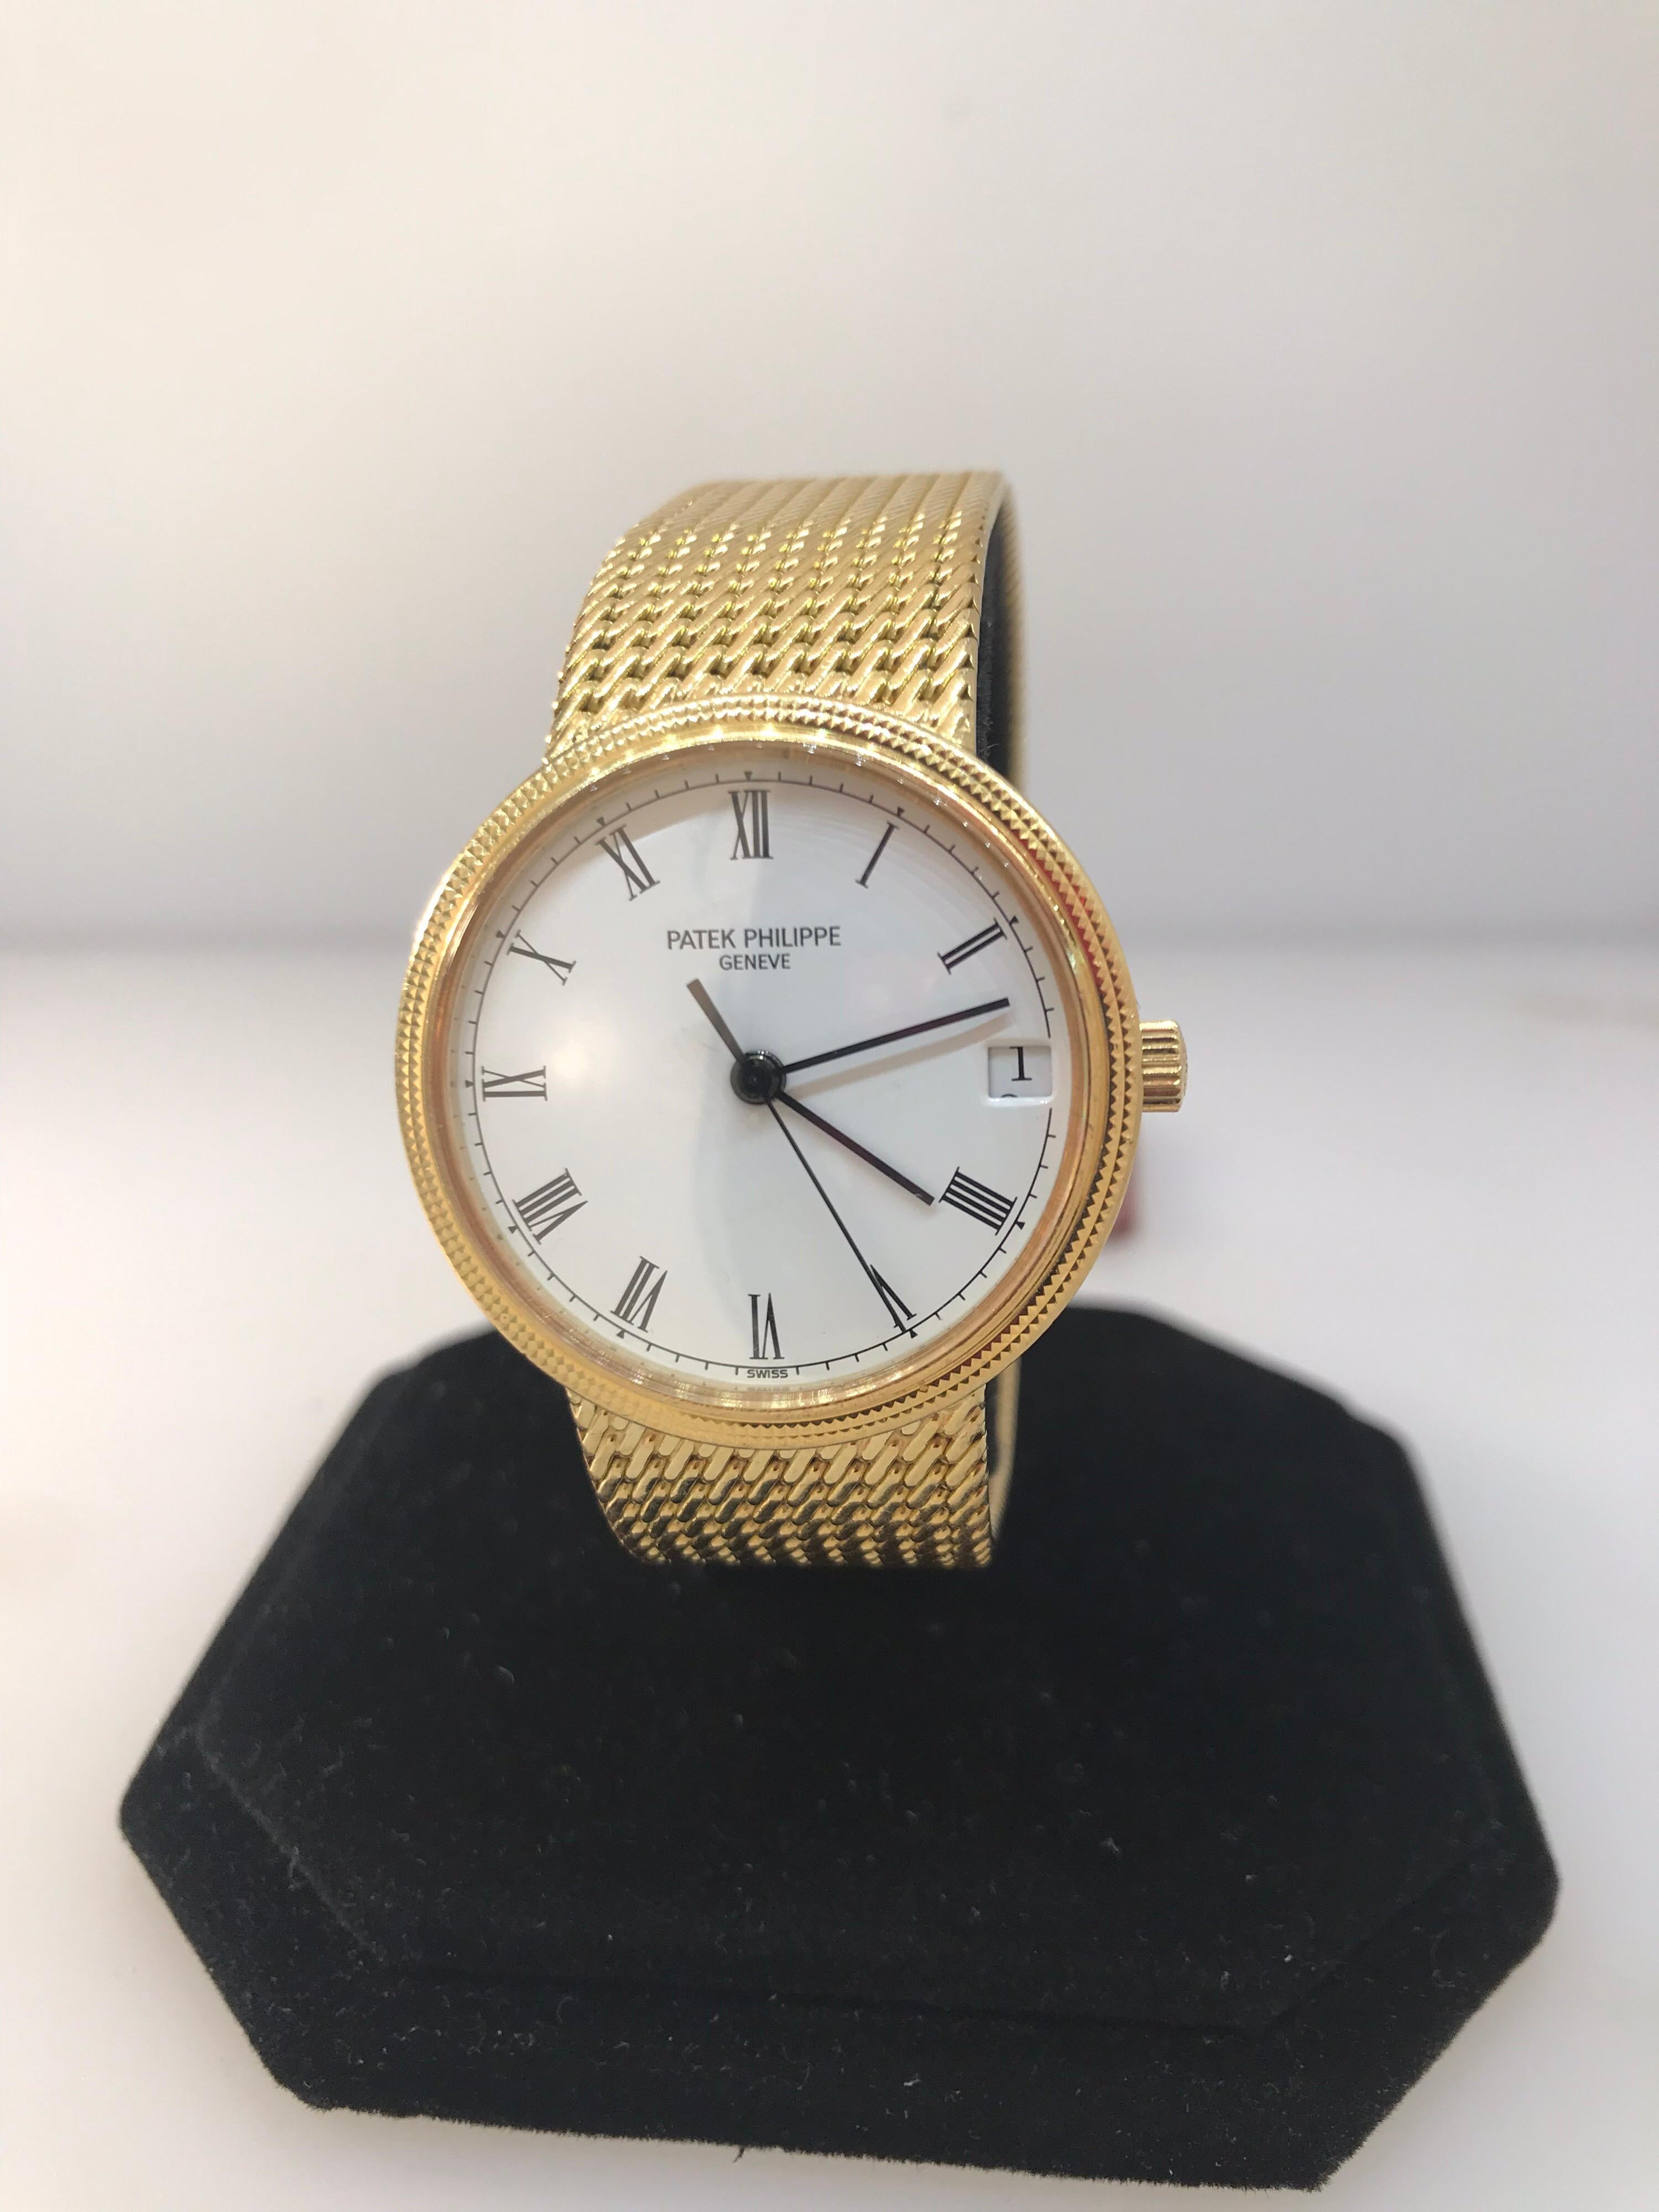 Patek Philippe Calatrava Men's Watch

Model Number: 3802/205J

100% Authentic

Pre owned in excellent condition

Comes with generic watch box

18 Karat Yellow Gold Case & Bracelet

White Dial

Roman Numeral Hour Markers

Case Diameter: 34mm